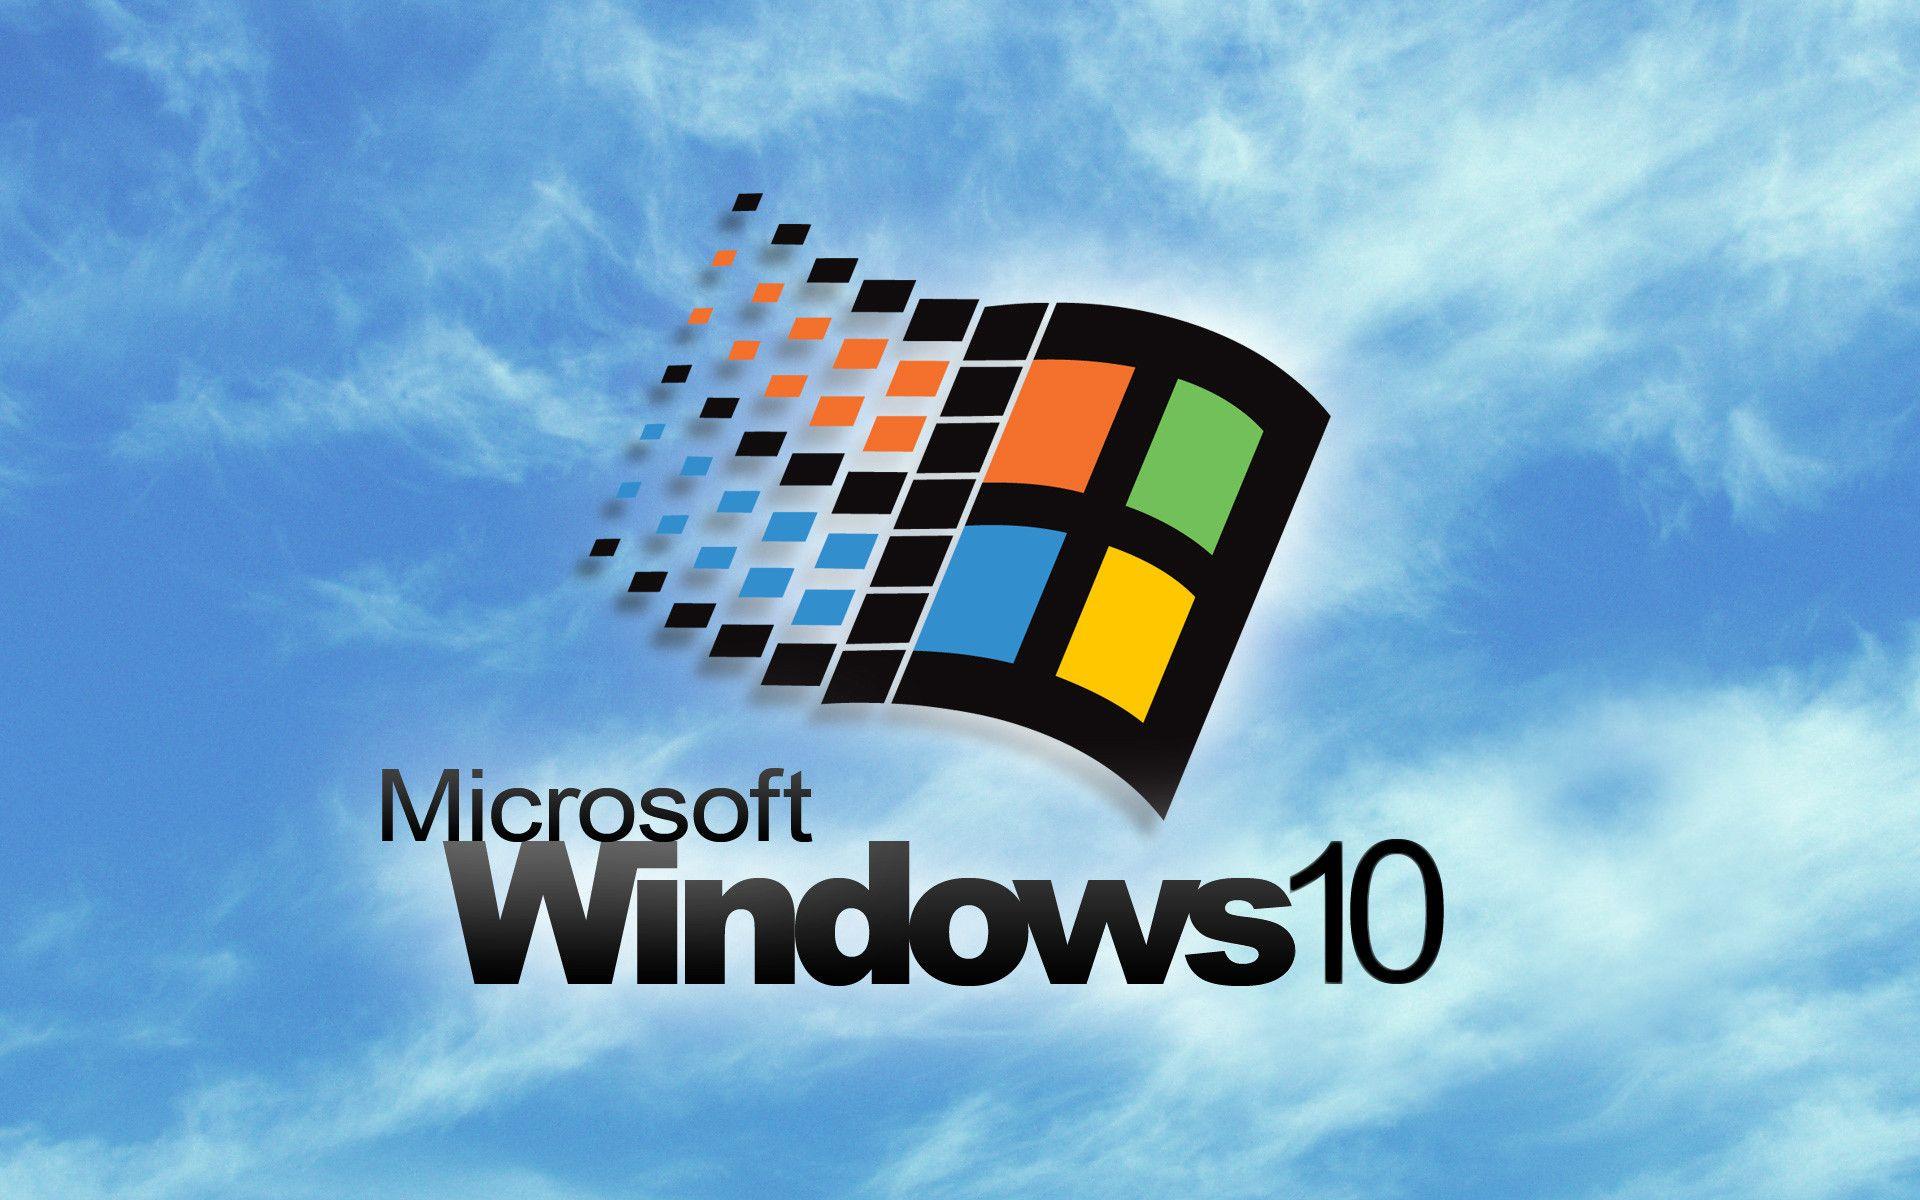 Windows 98 Logo - I edited a Windows 98 wallpaper to be a bit more relevant. Hope you